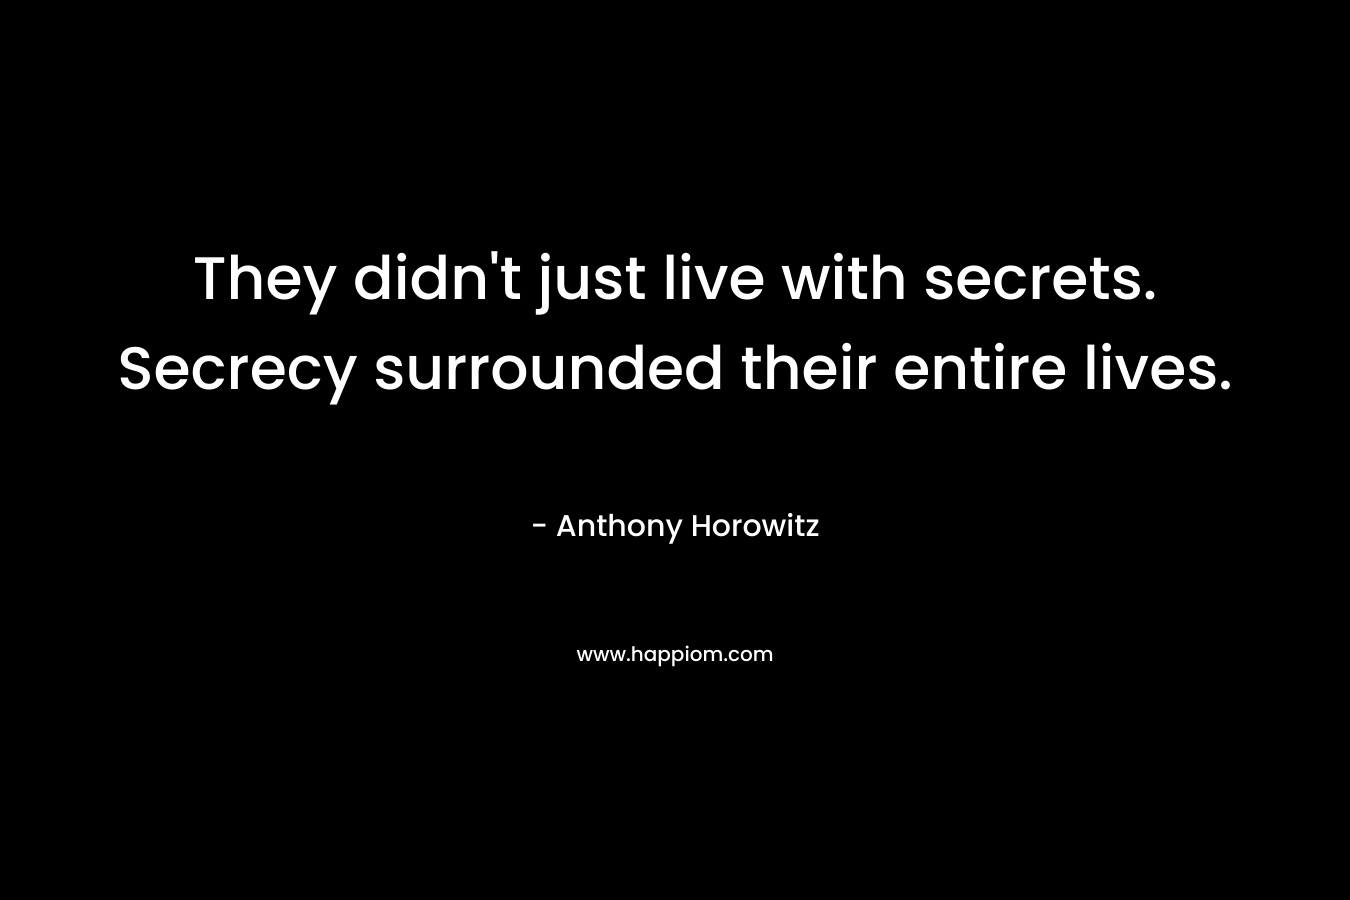 They didn’t just live with secrets. Secrecy surrounded their entire lives. – Anthony Horowitz